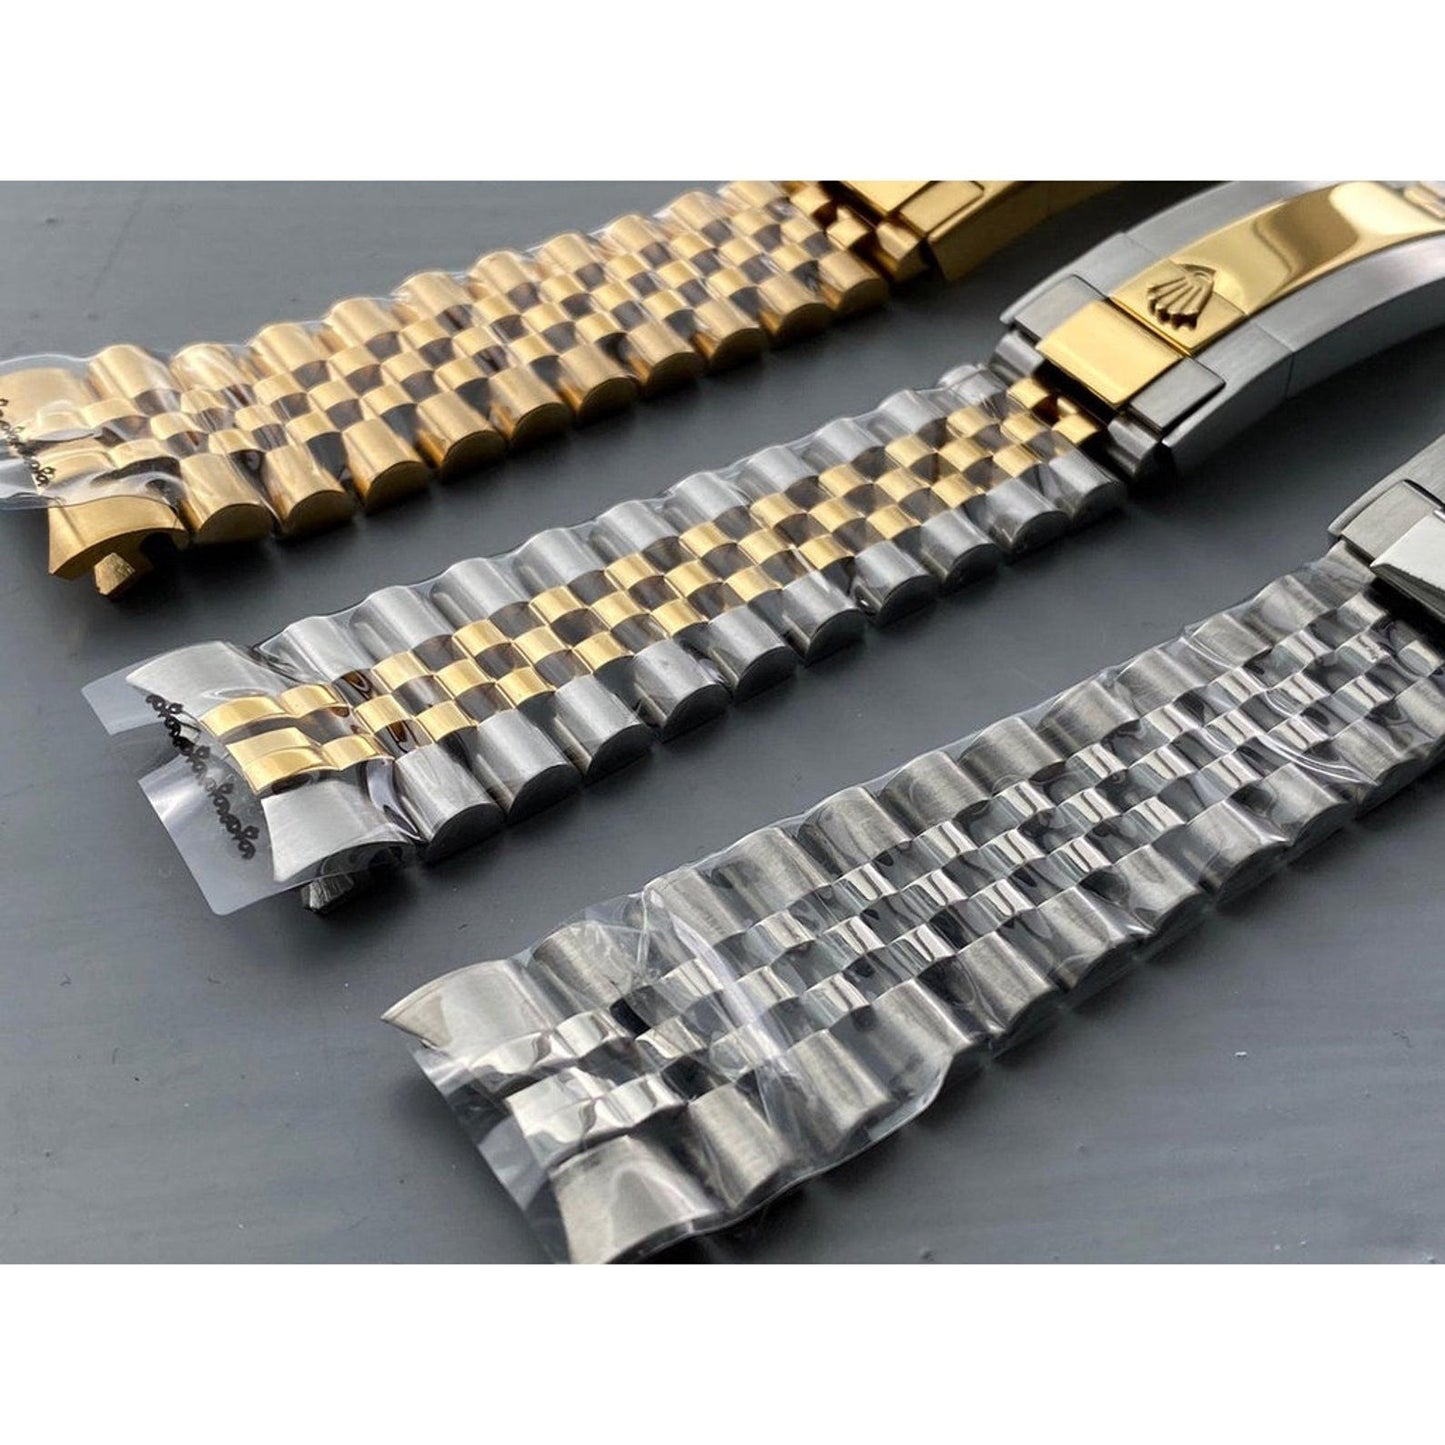 21MM Silver Gold Jubilee Watch Strap Band Oyster Clasp Bracelet For Rolex Stainless Solid Link Daytona, Submariner, Datejust, Yachtmaster